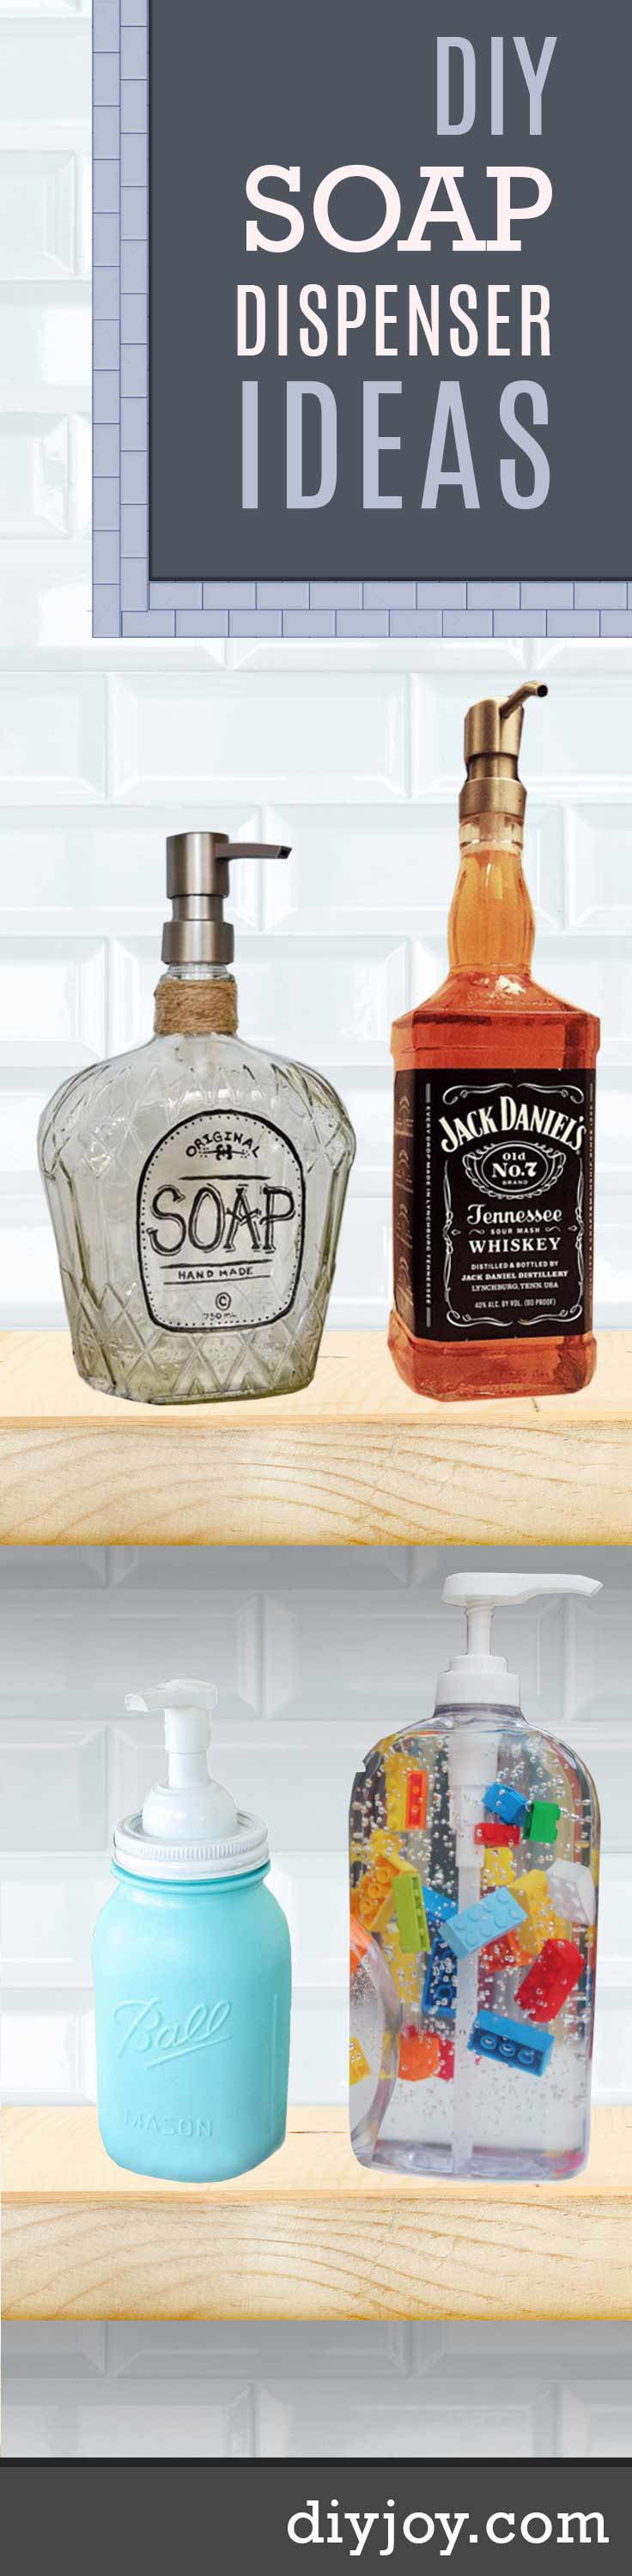 Upcycle an old bottle to make a dish soap dispenser. - The V Spot